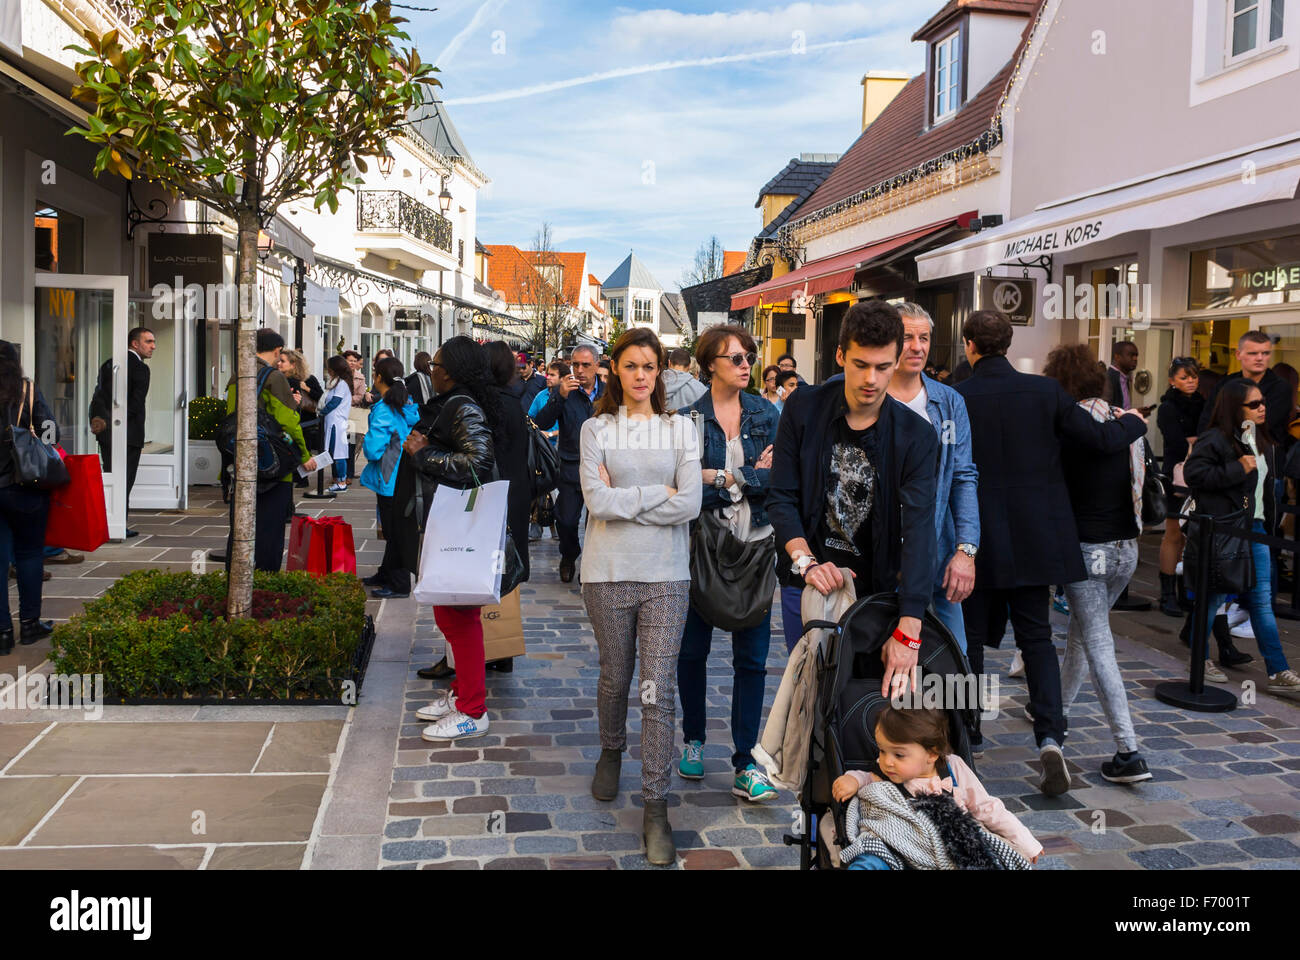 Paris, France, Crowd of People Shopping in Luxury Outlet Mall, Centre Stock Photo - Alamy